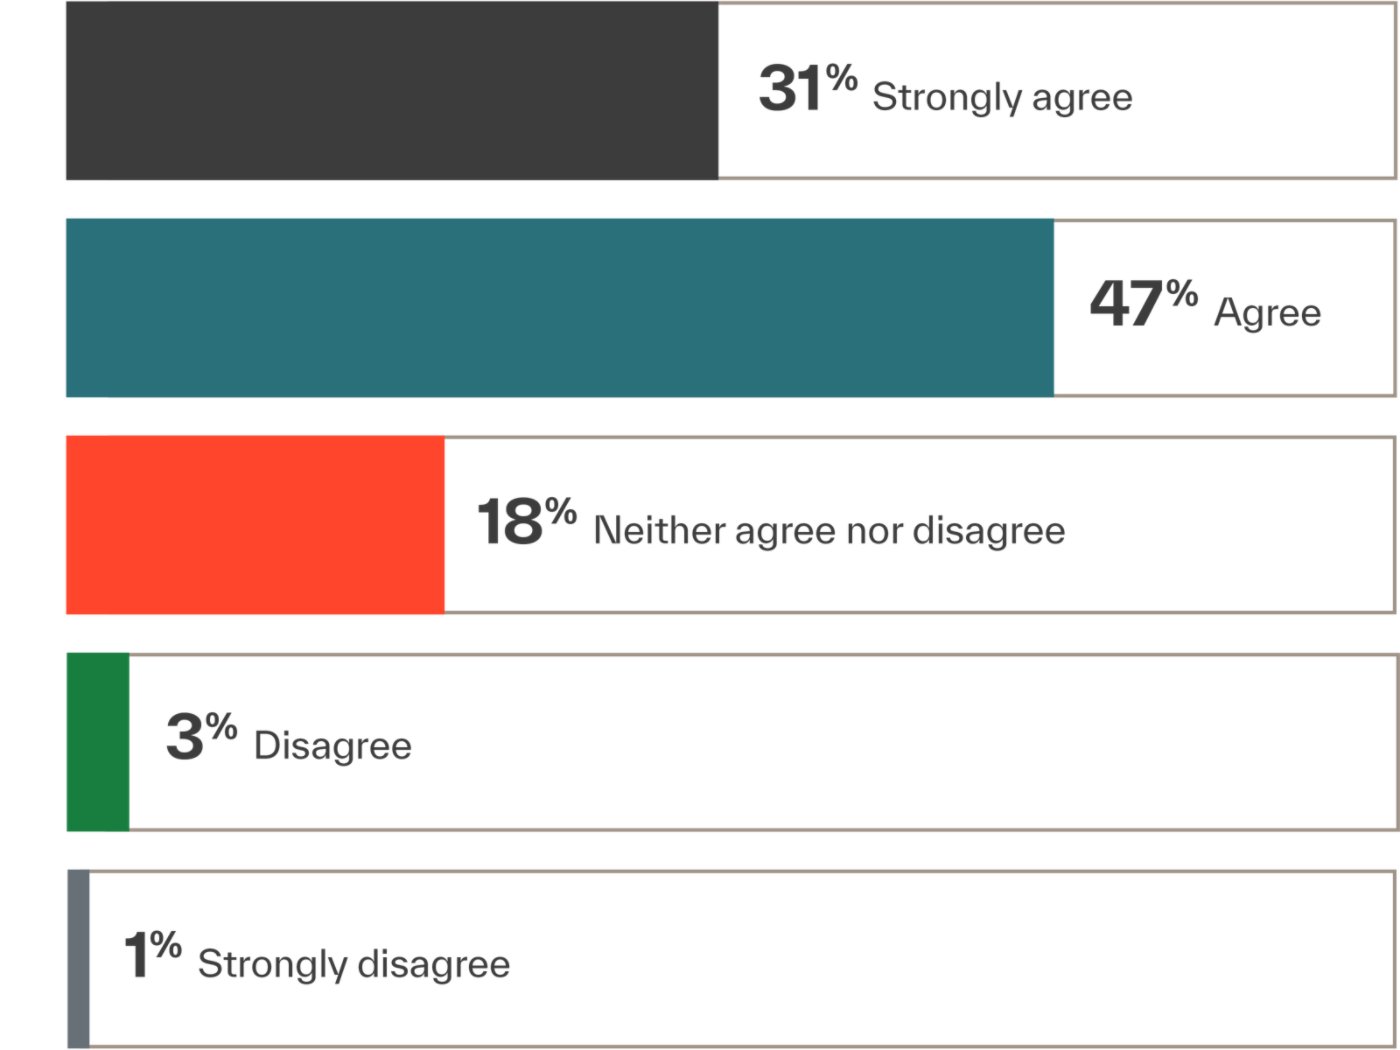 31% Strongly agree, 47% Agree, 18% Neither agree nor disagree, 3% Disagree, 1% Strongly disagree